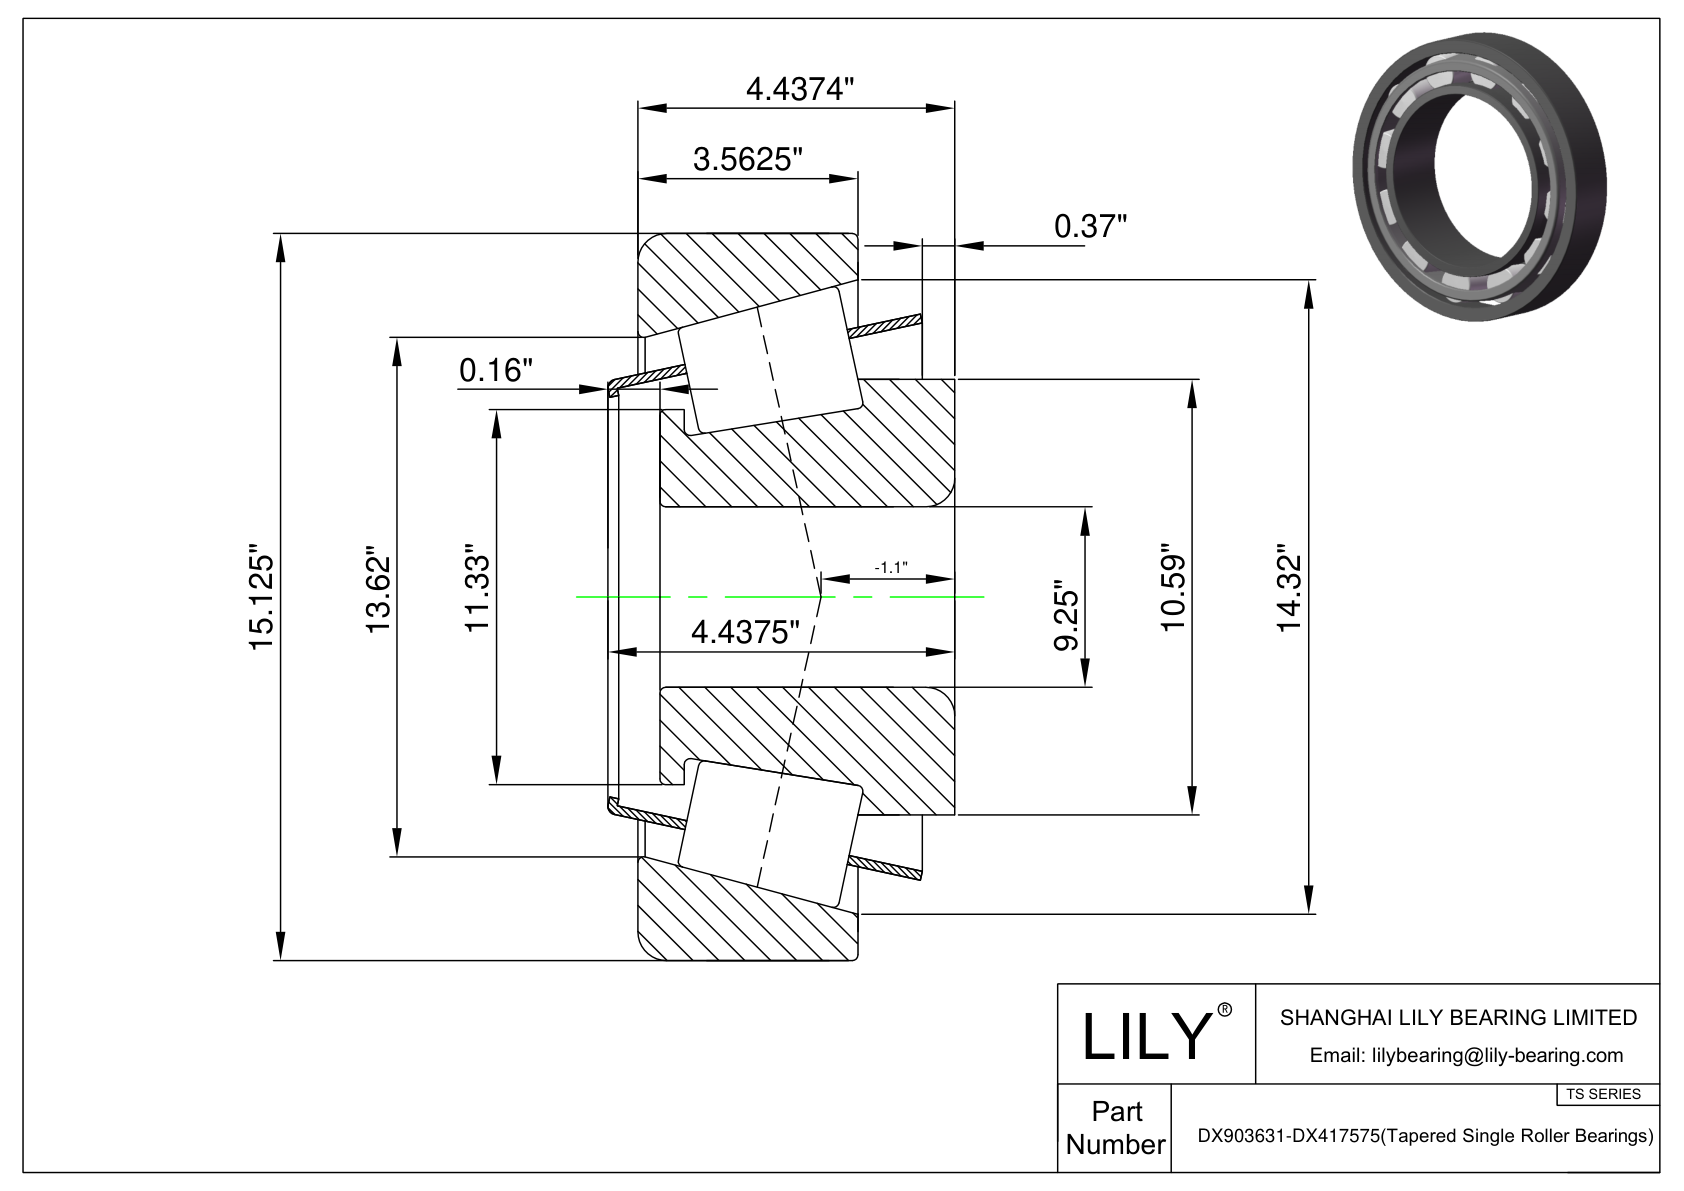 DX903631-DX417575 TS (Tapered Single Roller Bearings) (Imperial) cad drawing